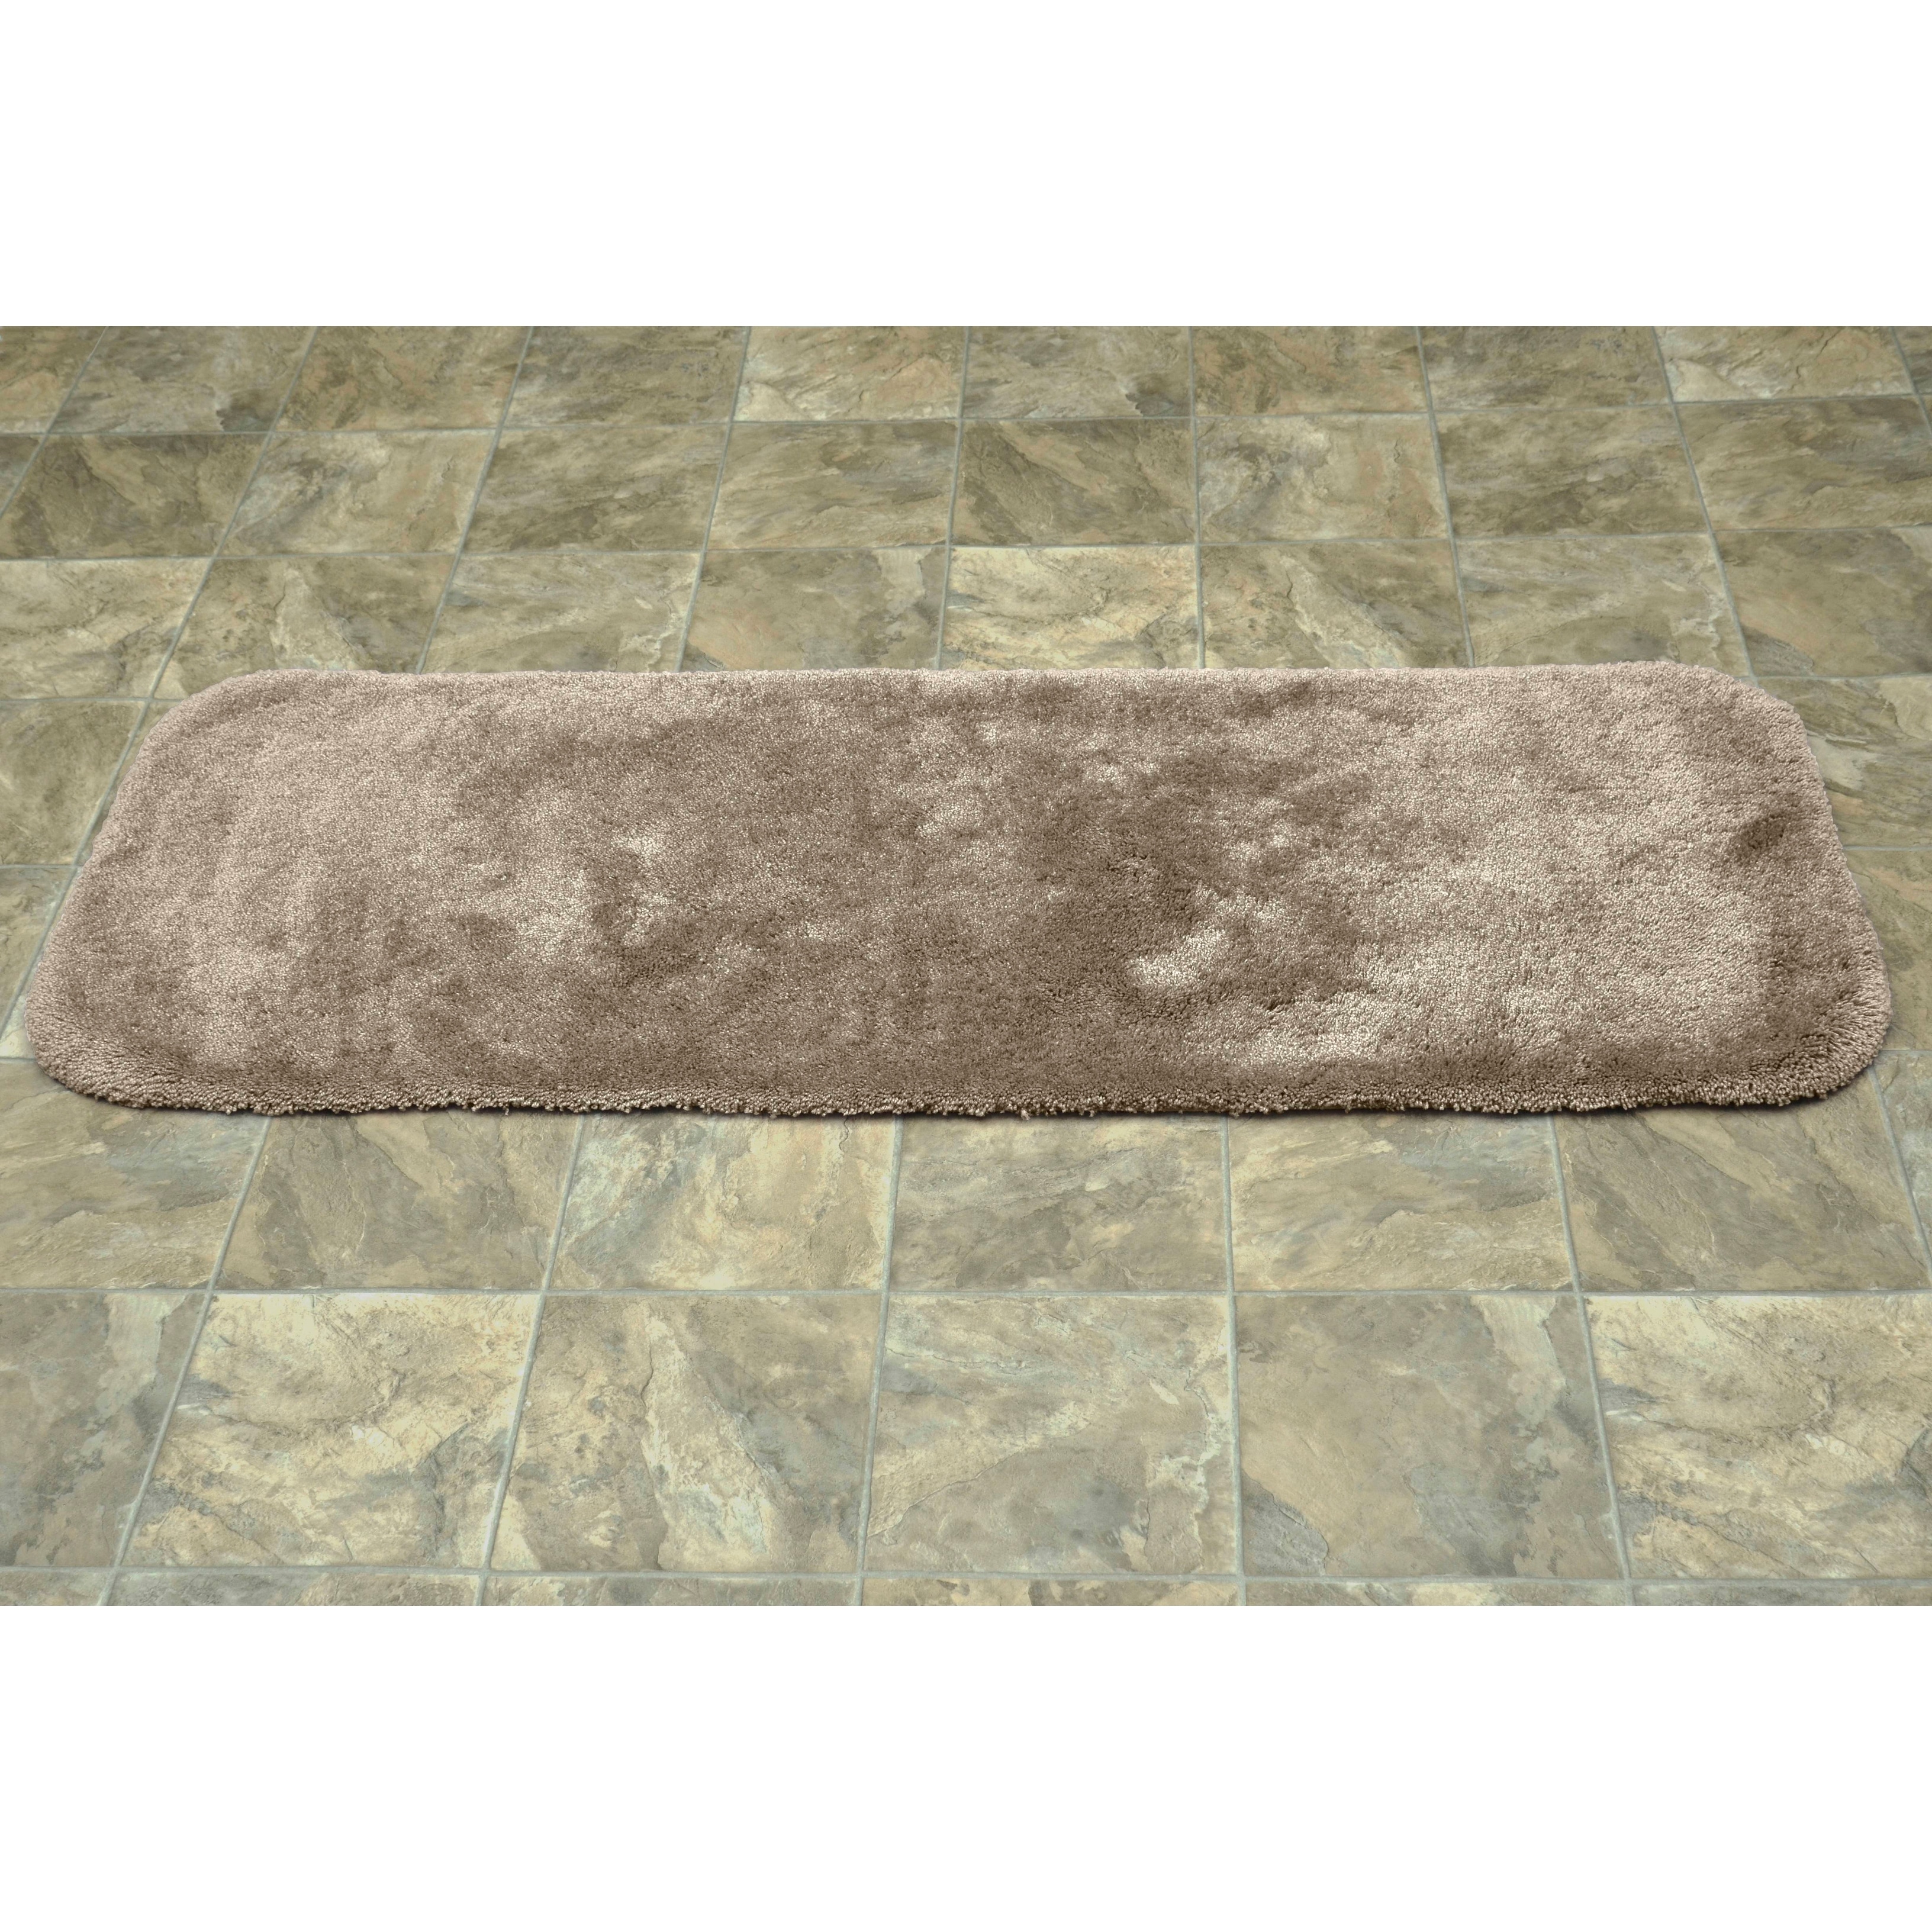 https://ak1.ostkcdn.com/images/products/is/images/direct/bd0ec7645853bf58c72c2690744eff8e574b0e60/Finest-Luxury-Taupe-Ultra-Plush-Washable-Bath-Rug-Runner.jpg